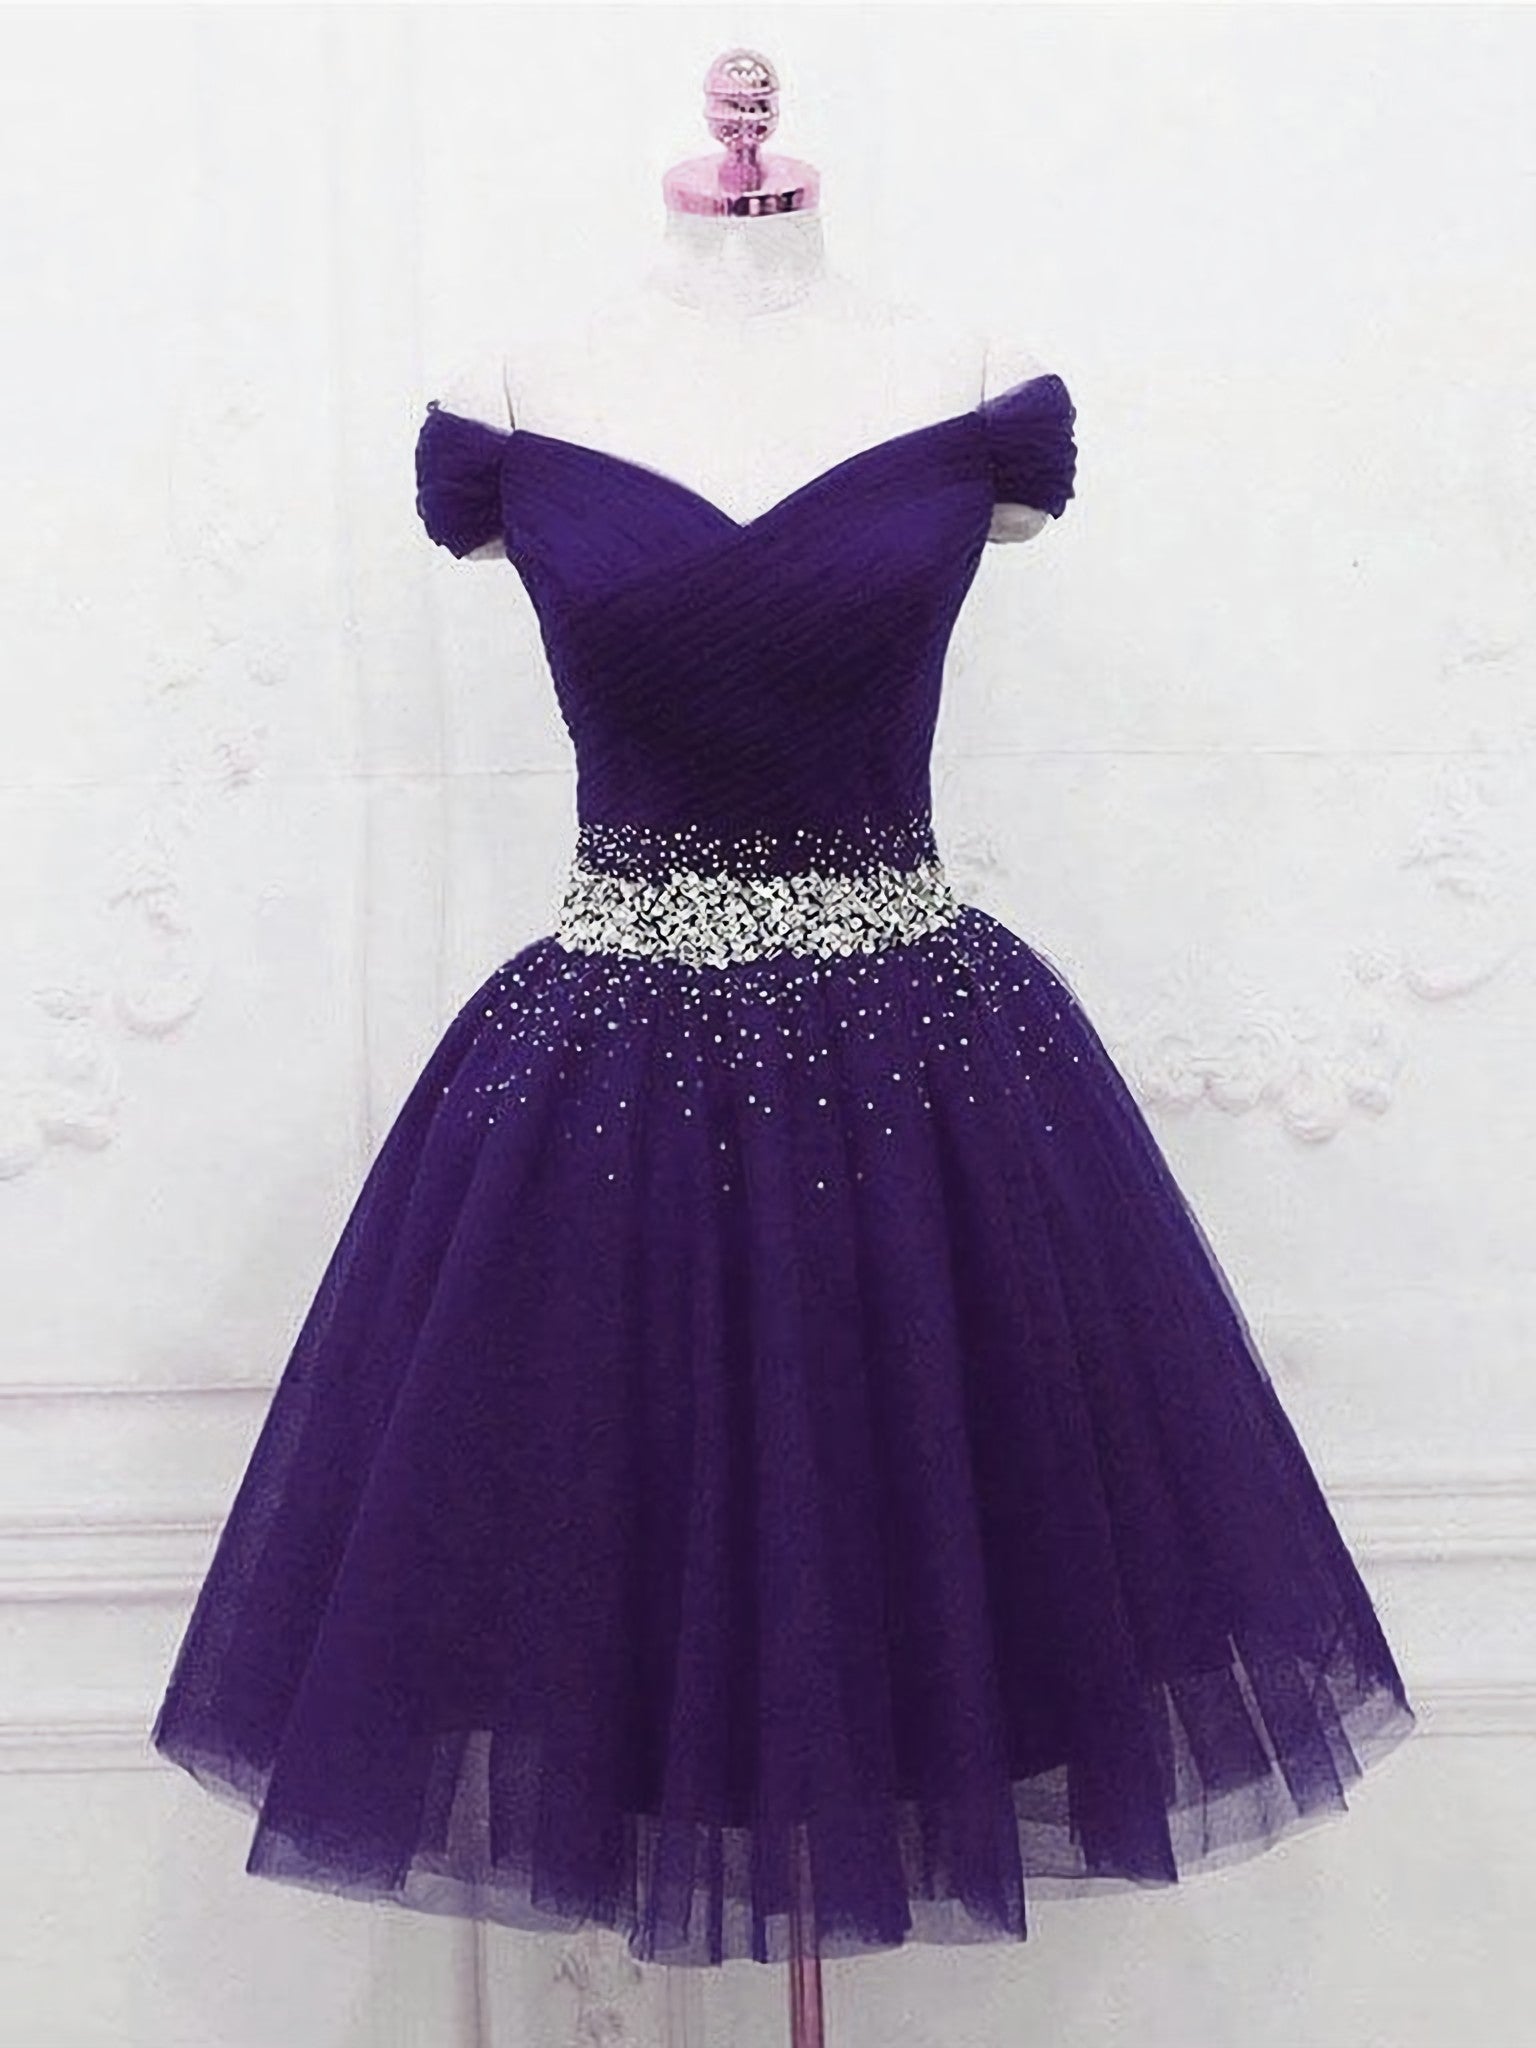 Prom Dress Colorful, Purple Homecoming Dress, Party Dress